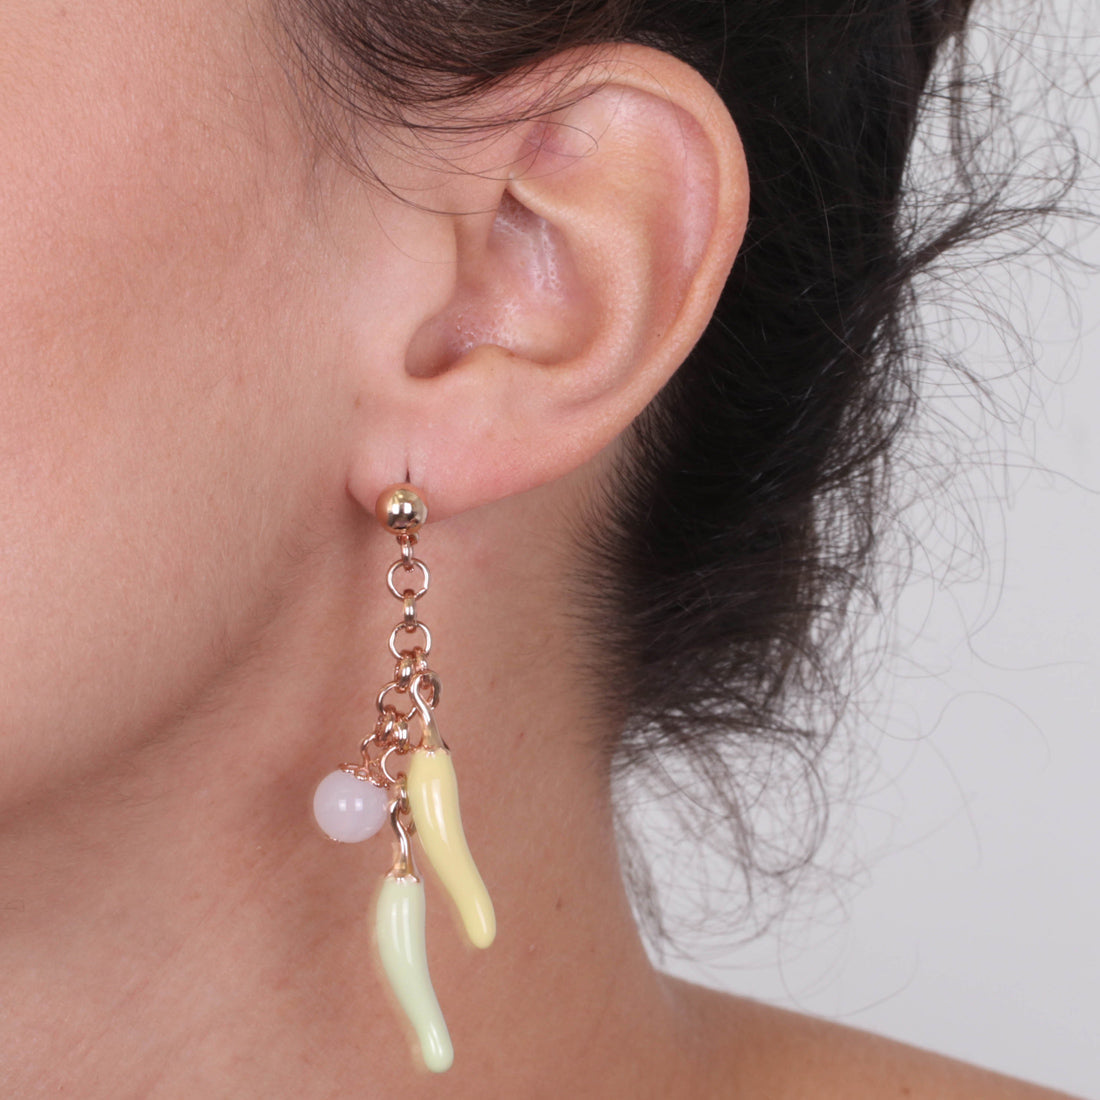 Metal earrings pending with lucky horns, embellished with colored glazes